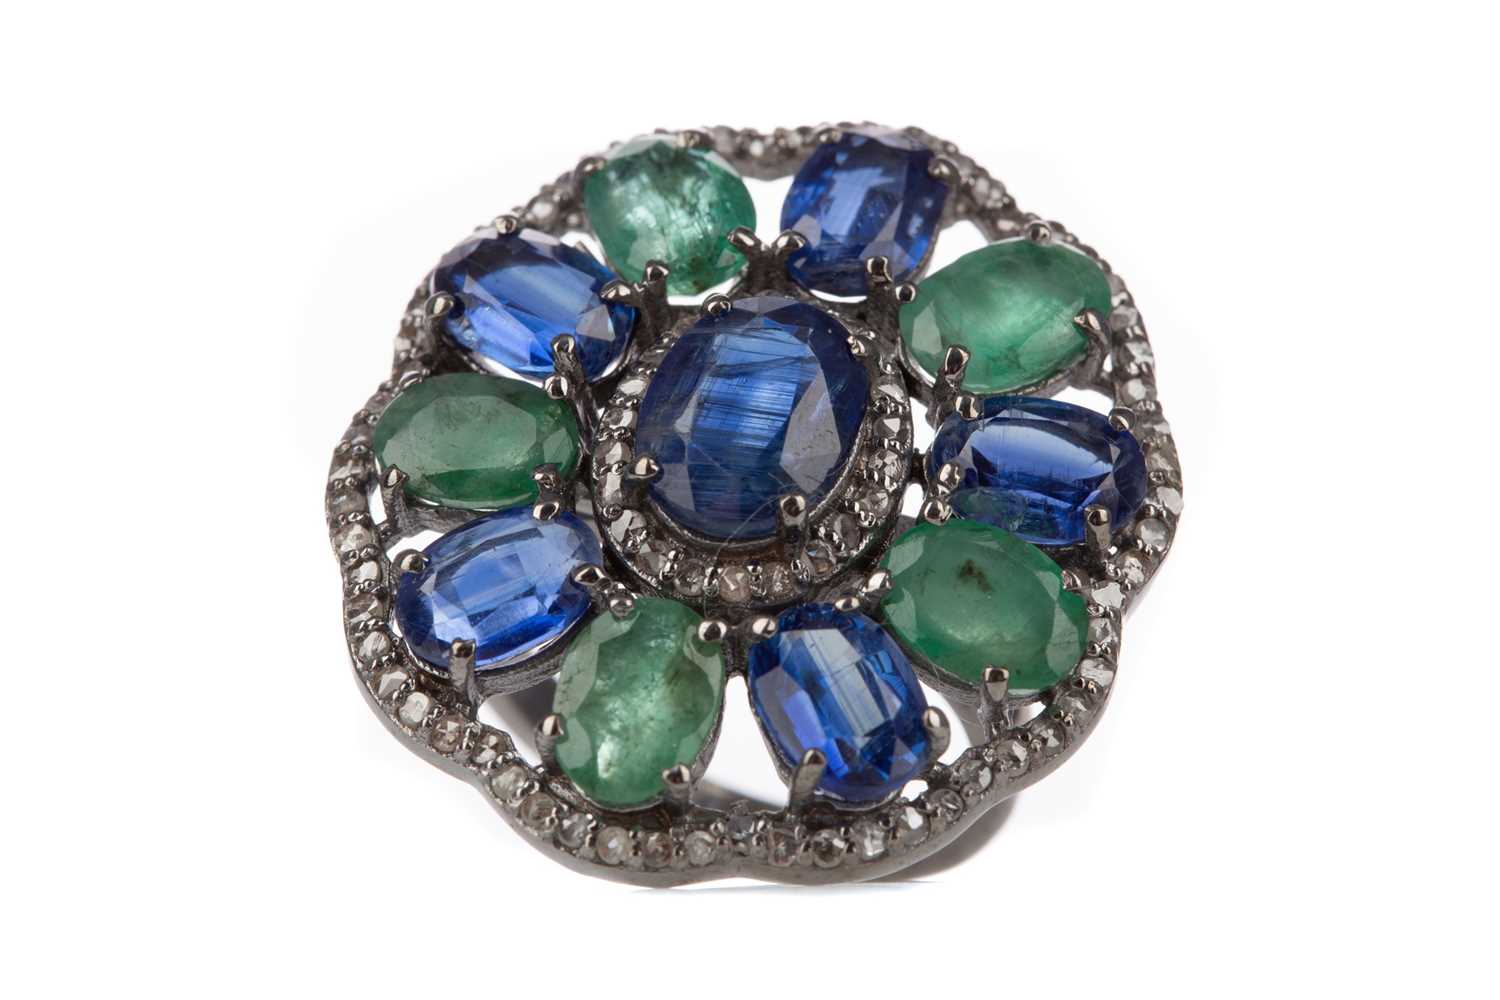 Lot 1503 - A KYANITE, EMERALD AND DIAMOND RING